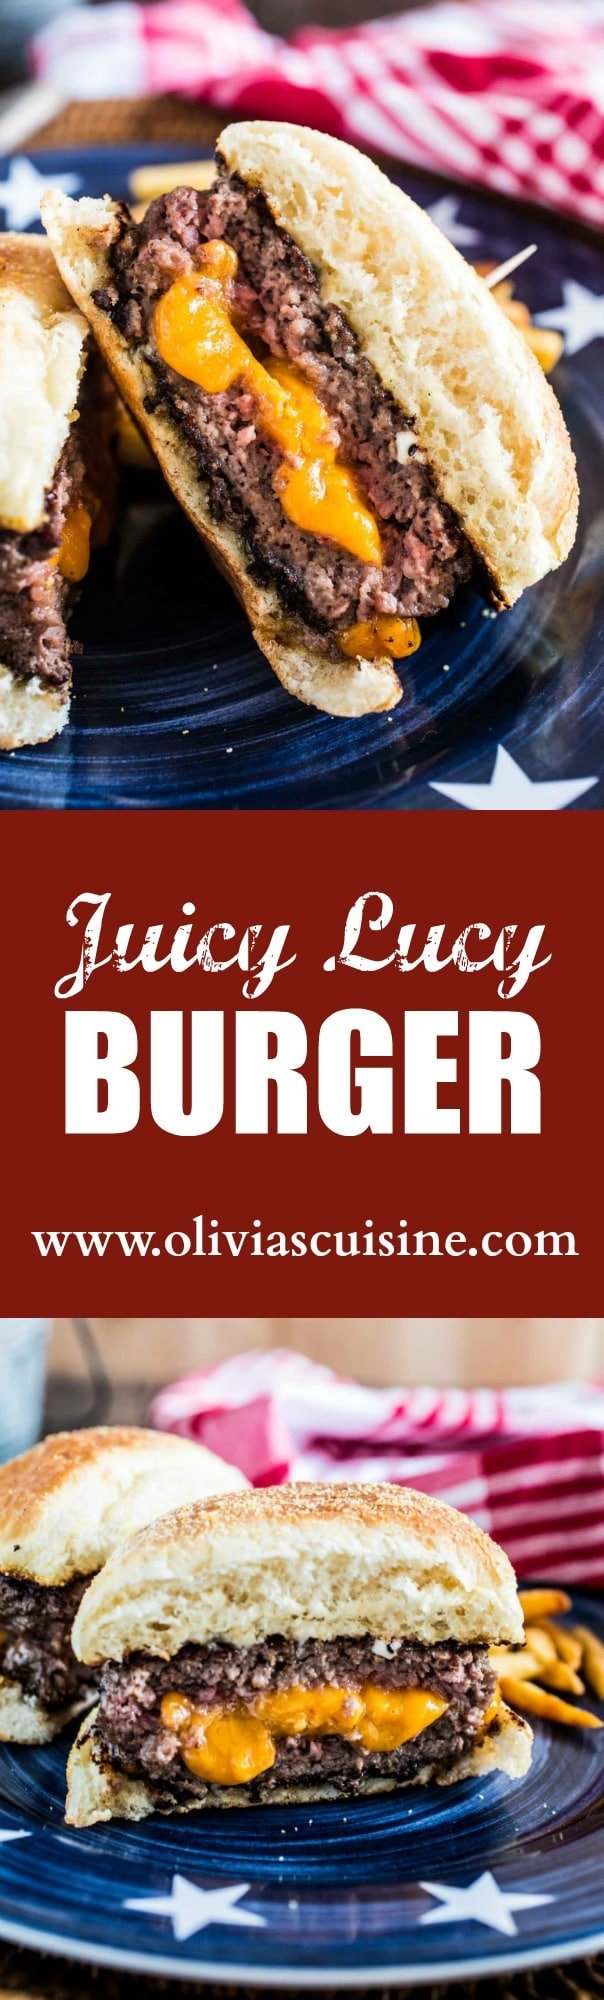 Juicy Lucy Burger | www.oliviascuisine.com | An iconic Minneapolis burger, stuffed with lots of cheese!